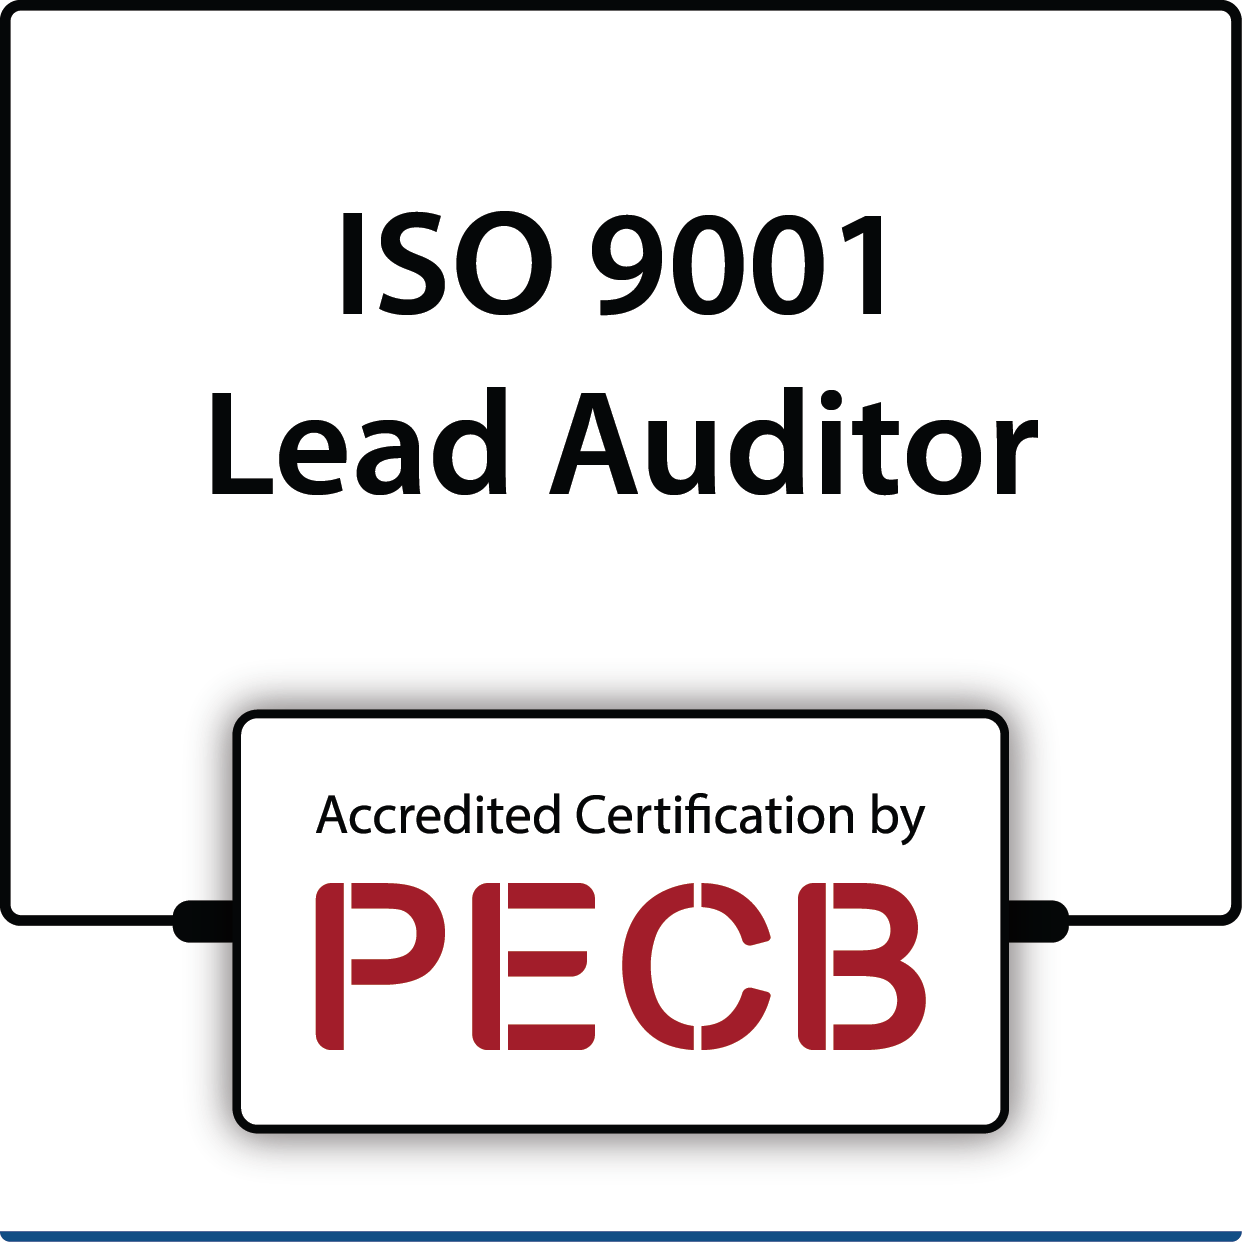 ISO 9001 Lead Auditor Certification